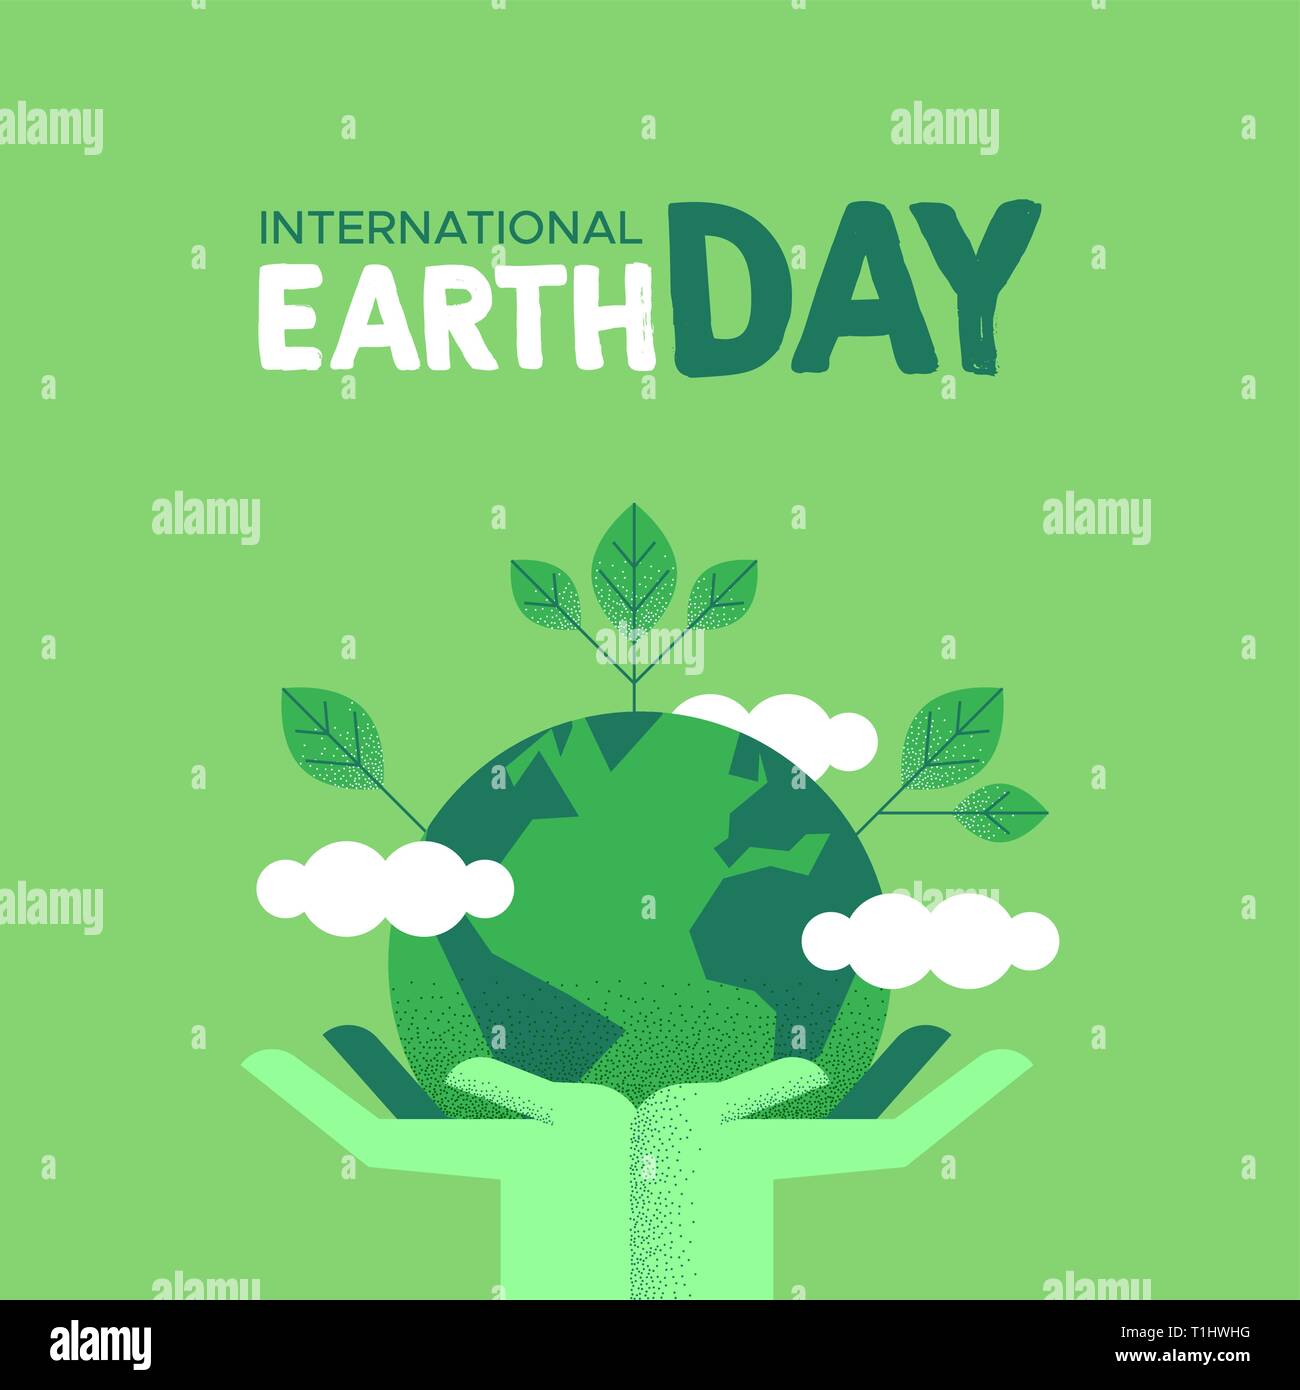 International Earth Day illustration of green human hands holding planet with leaves. Social environment care awareness concept. Stock Vector